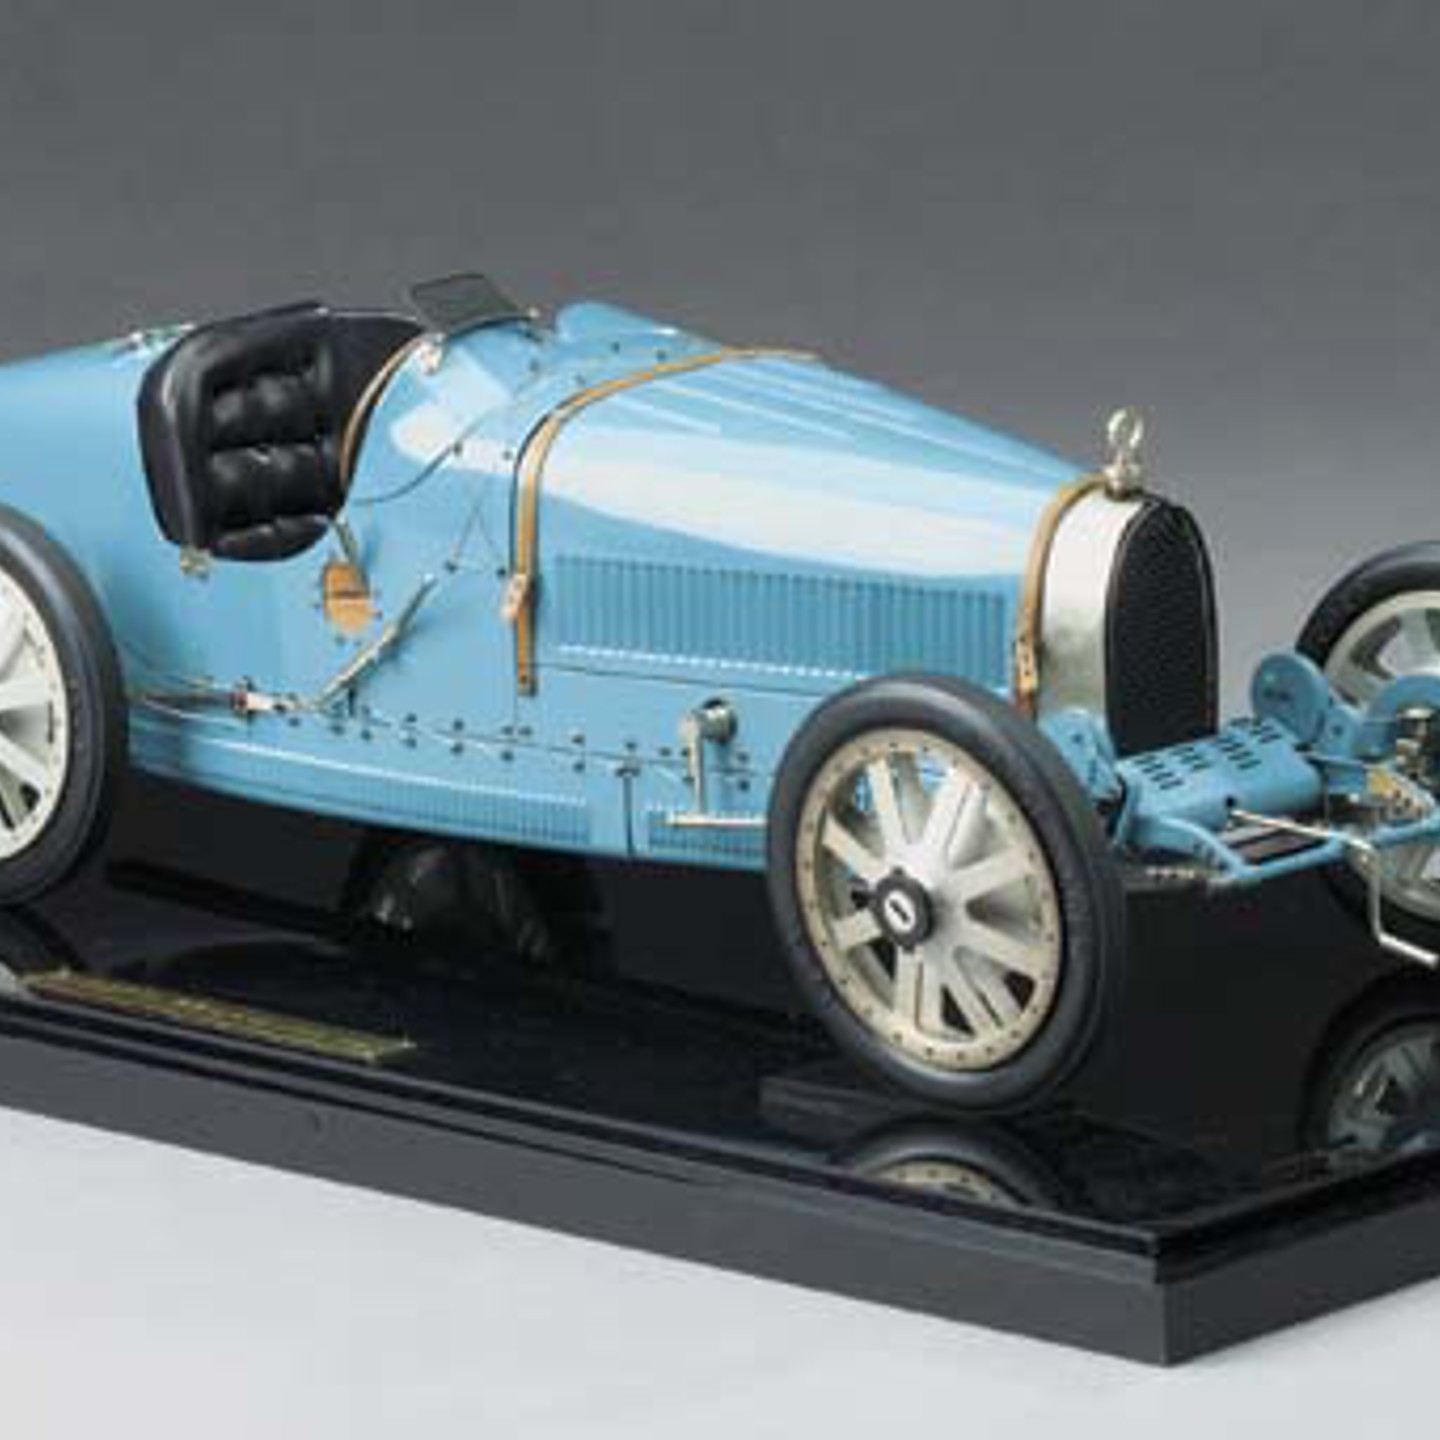 Bugatti Type 35 Model By Art Auto Collection. Sold For £2,500